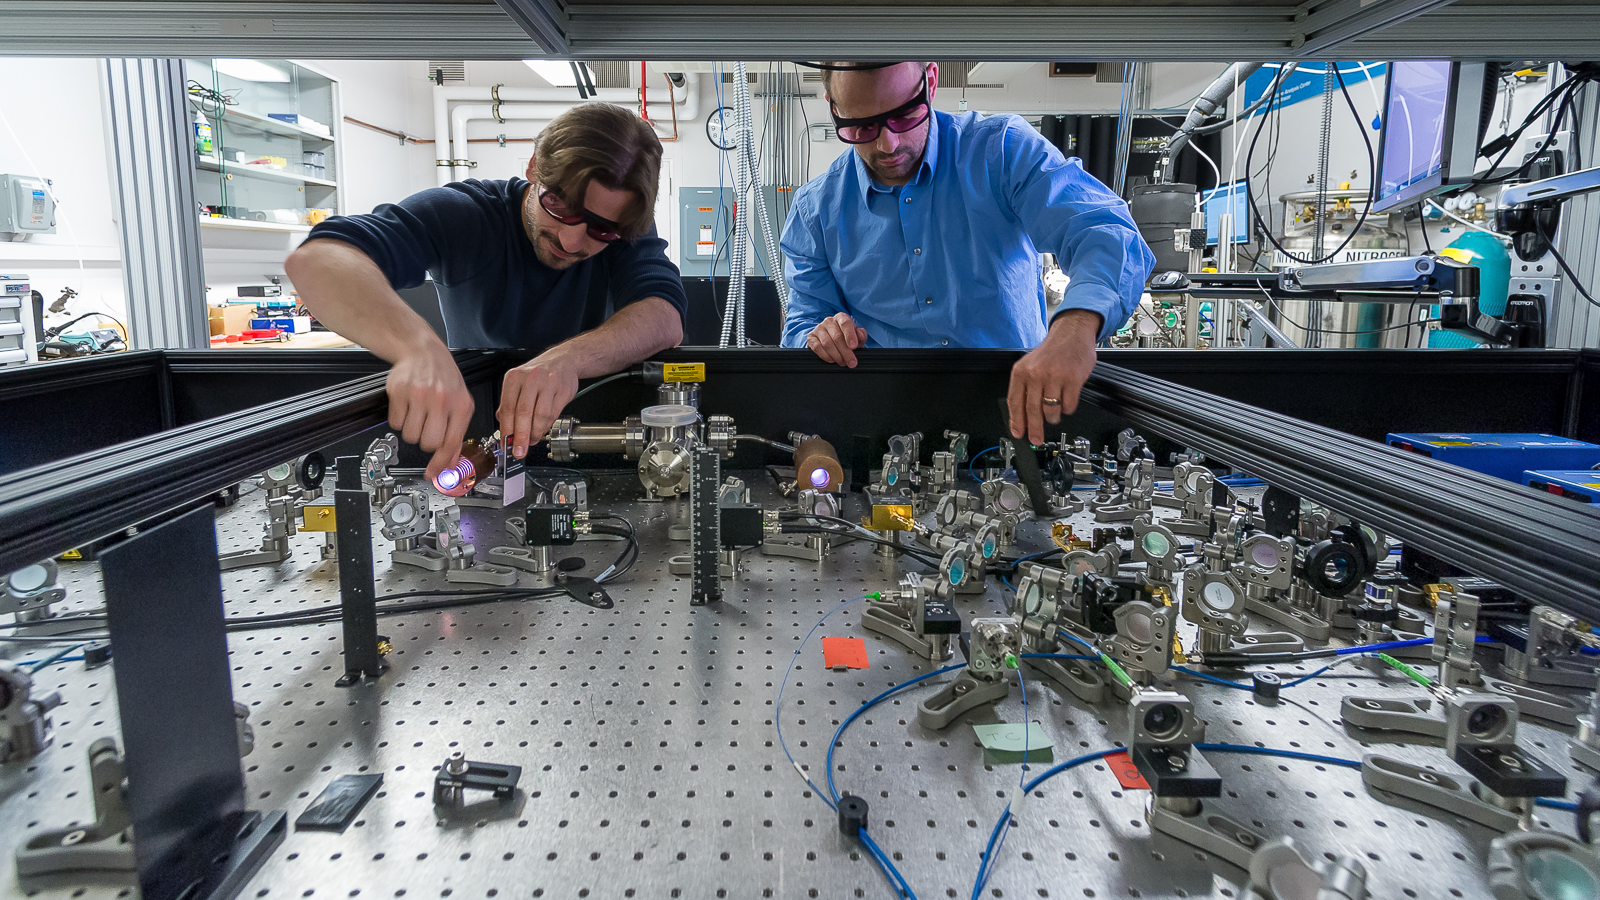 Argonne assistant physicist, Michael Bishof, aligns lasers used to trap and detect single atoms in Argonne’s Trace Radioisotope Analysis Center (TRACER). (Image by Mark Lopez, Argonne National Laboratory.)